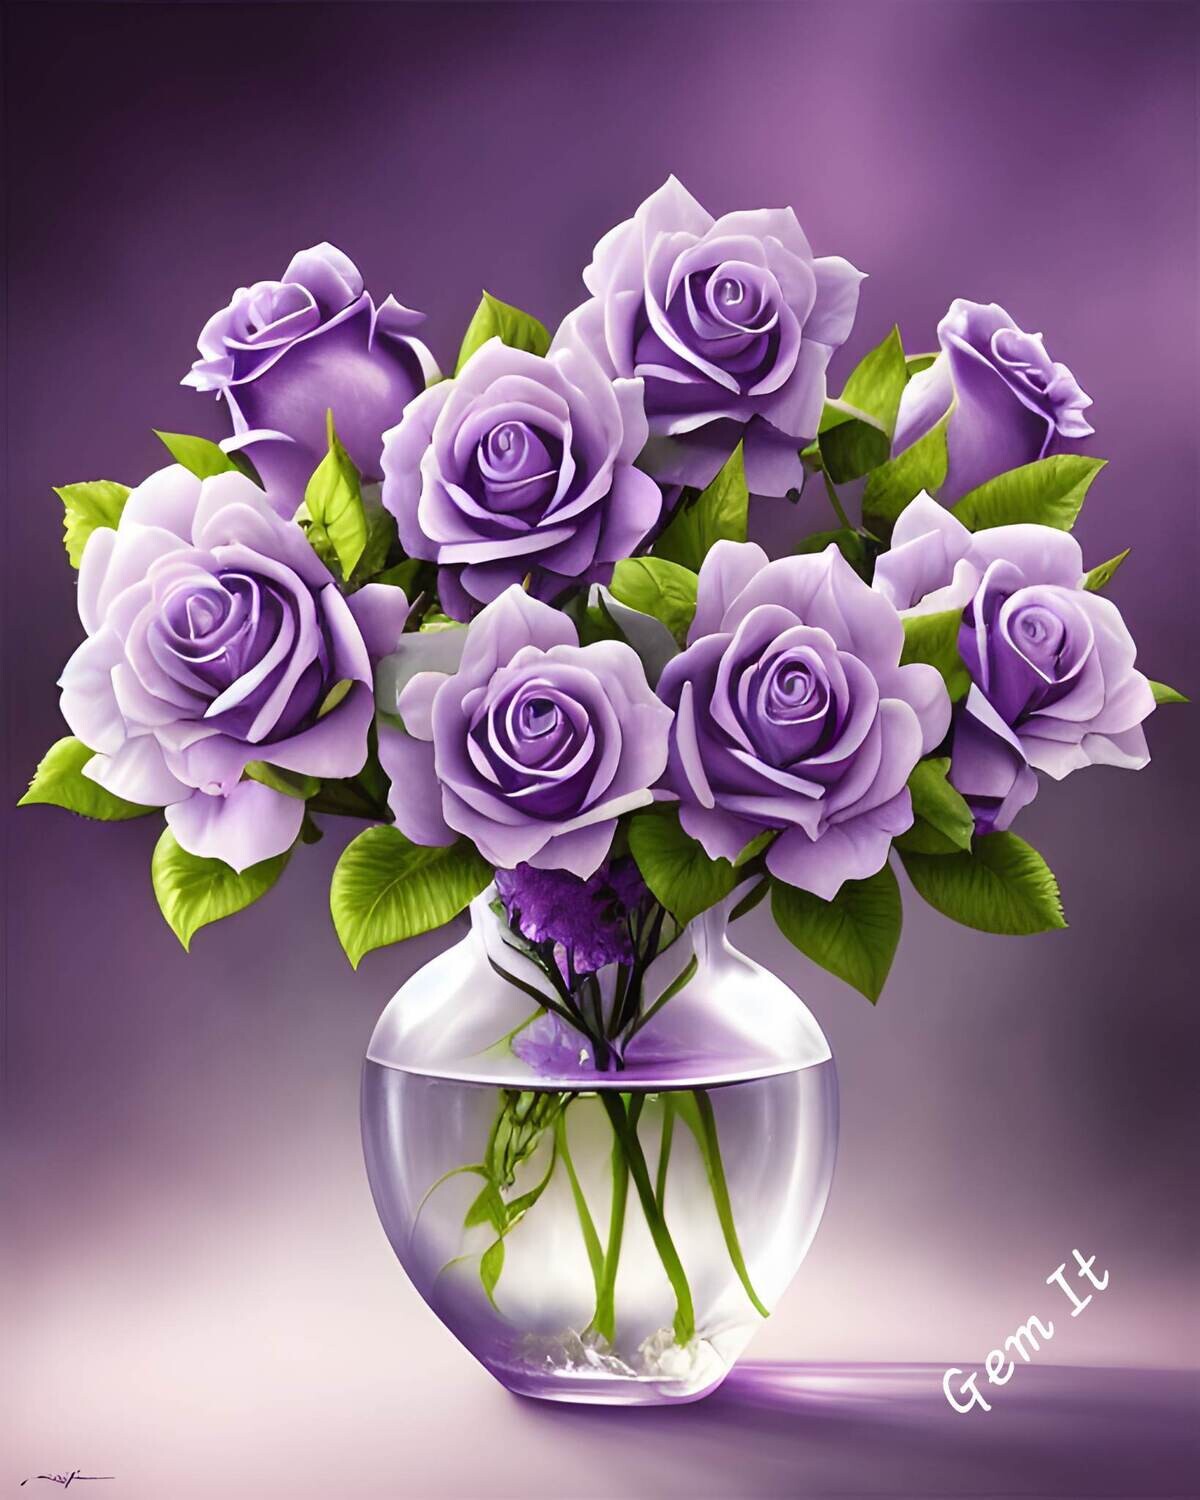 Roses Lilac 2 - Specially ordered for you. Delivery is approximately 4 - 6 weeks.